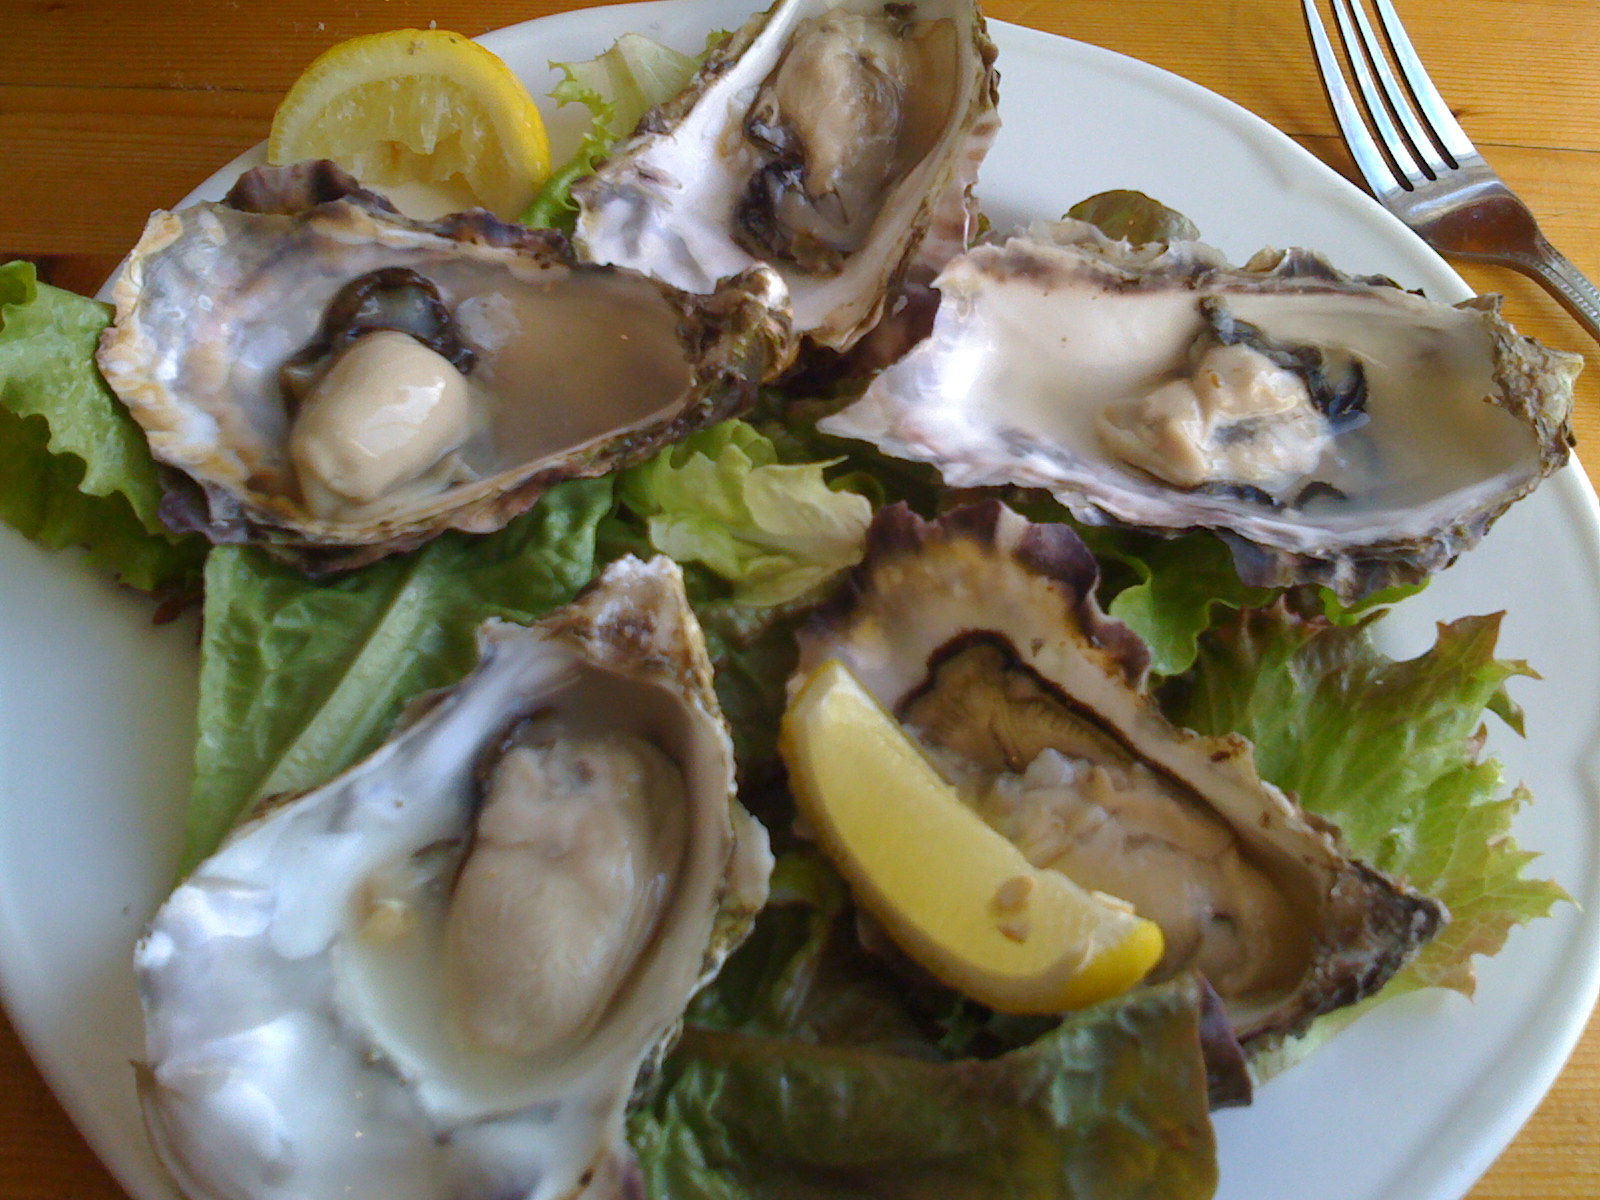 plate of oysters, garnished with lemon wedges and lettuce